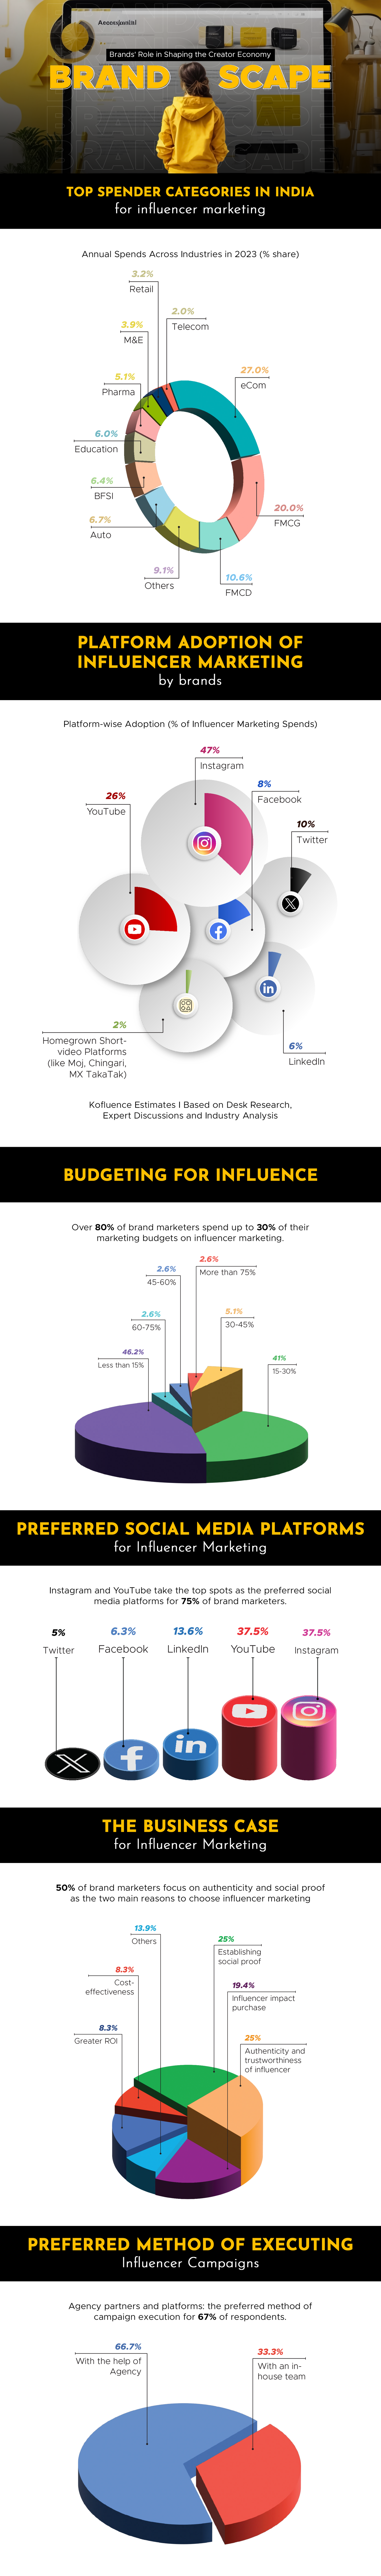 influencer marketing research report findings - Brand